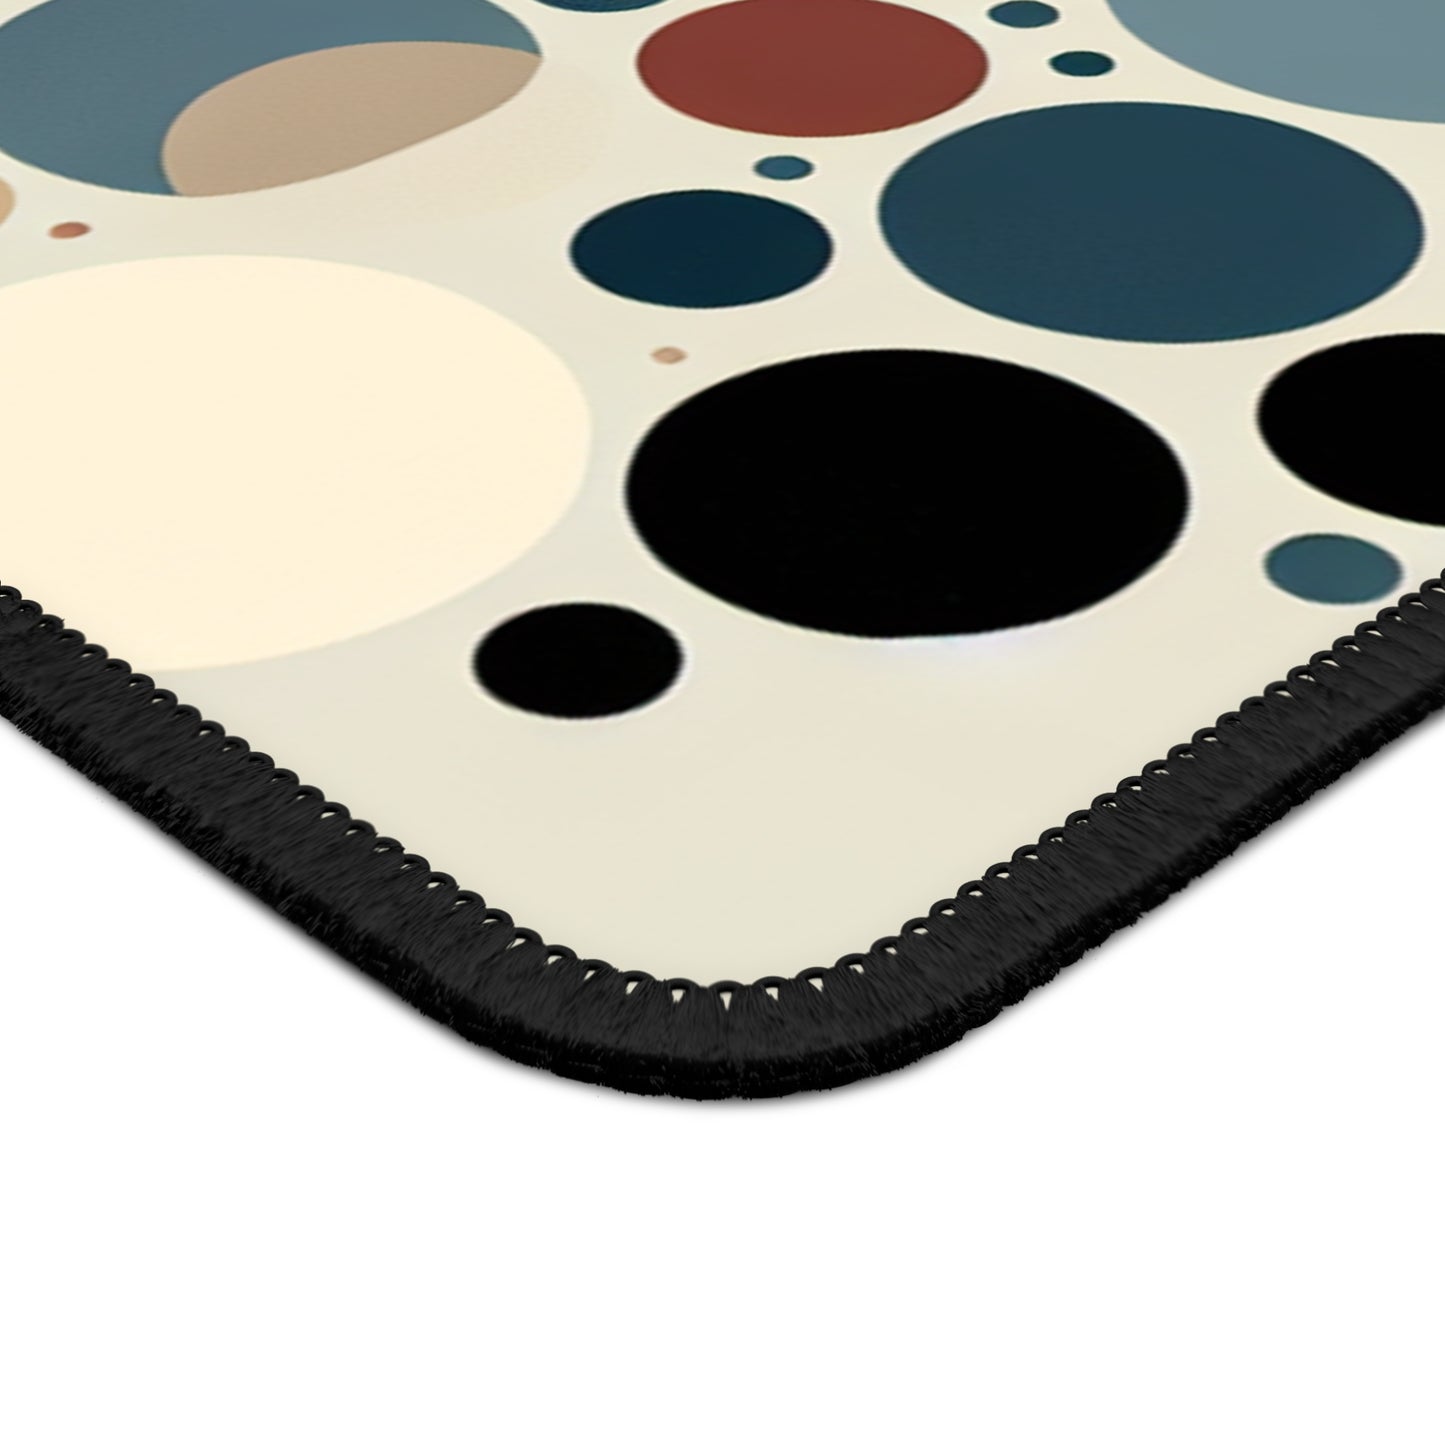 "Interwoven Circles: A Minimalist Approach" - The Alien Gaming Mouse Pad Minimalism Style